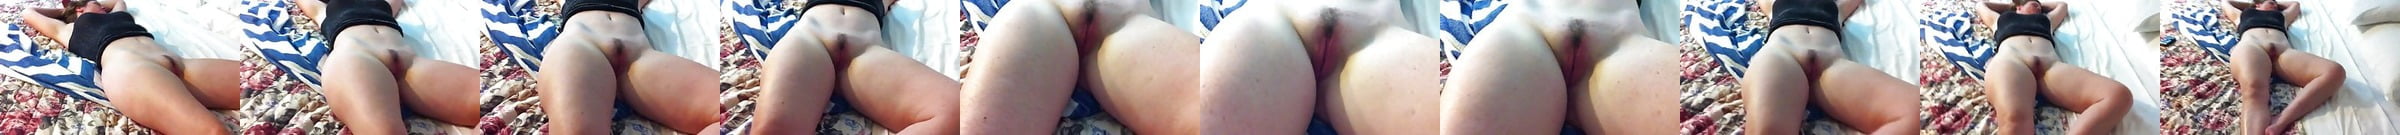 My Wifes Boobs Swinging And Bouncing Hd Porn E8 Xhamster Xhamster 